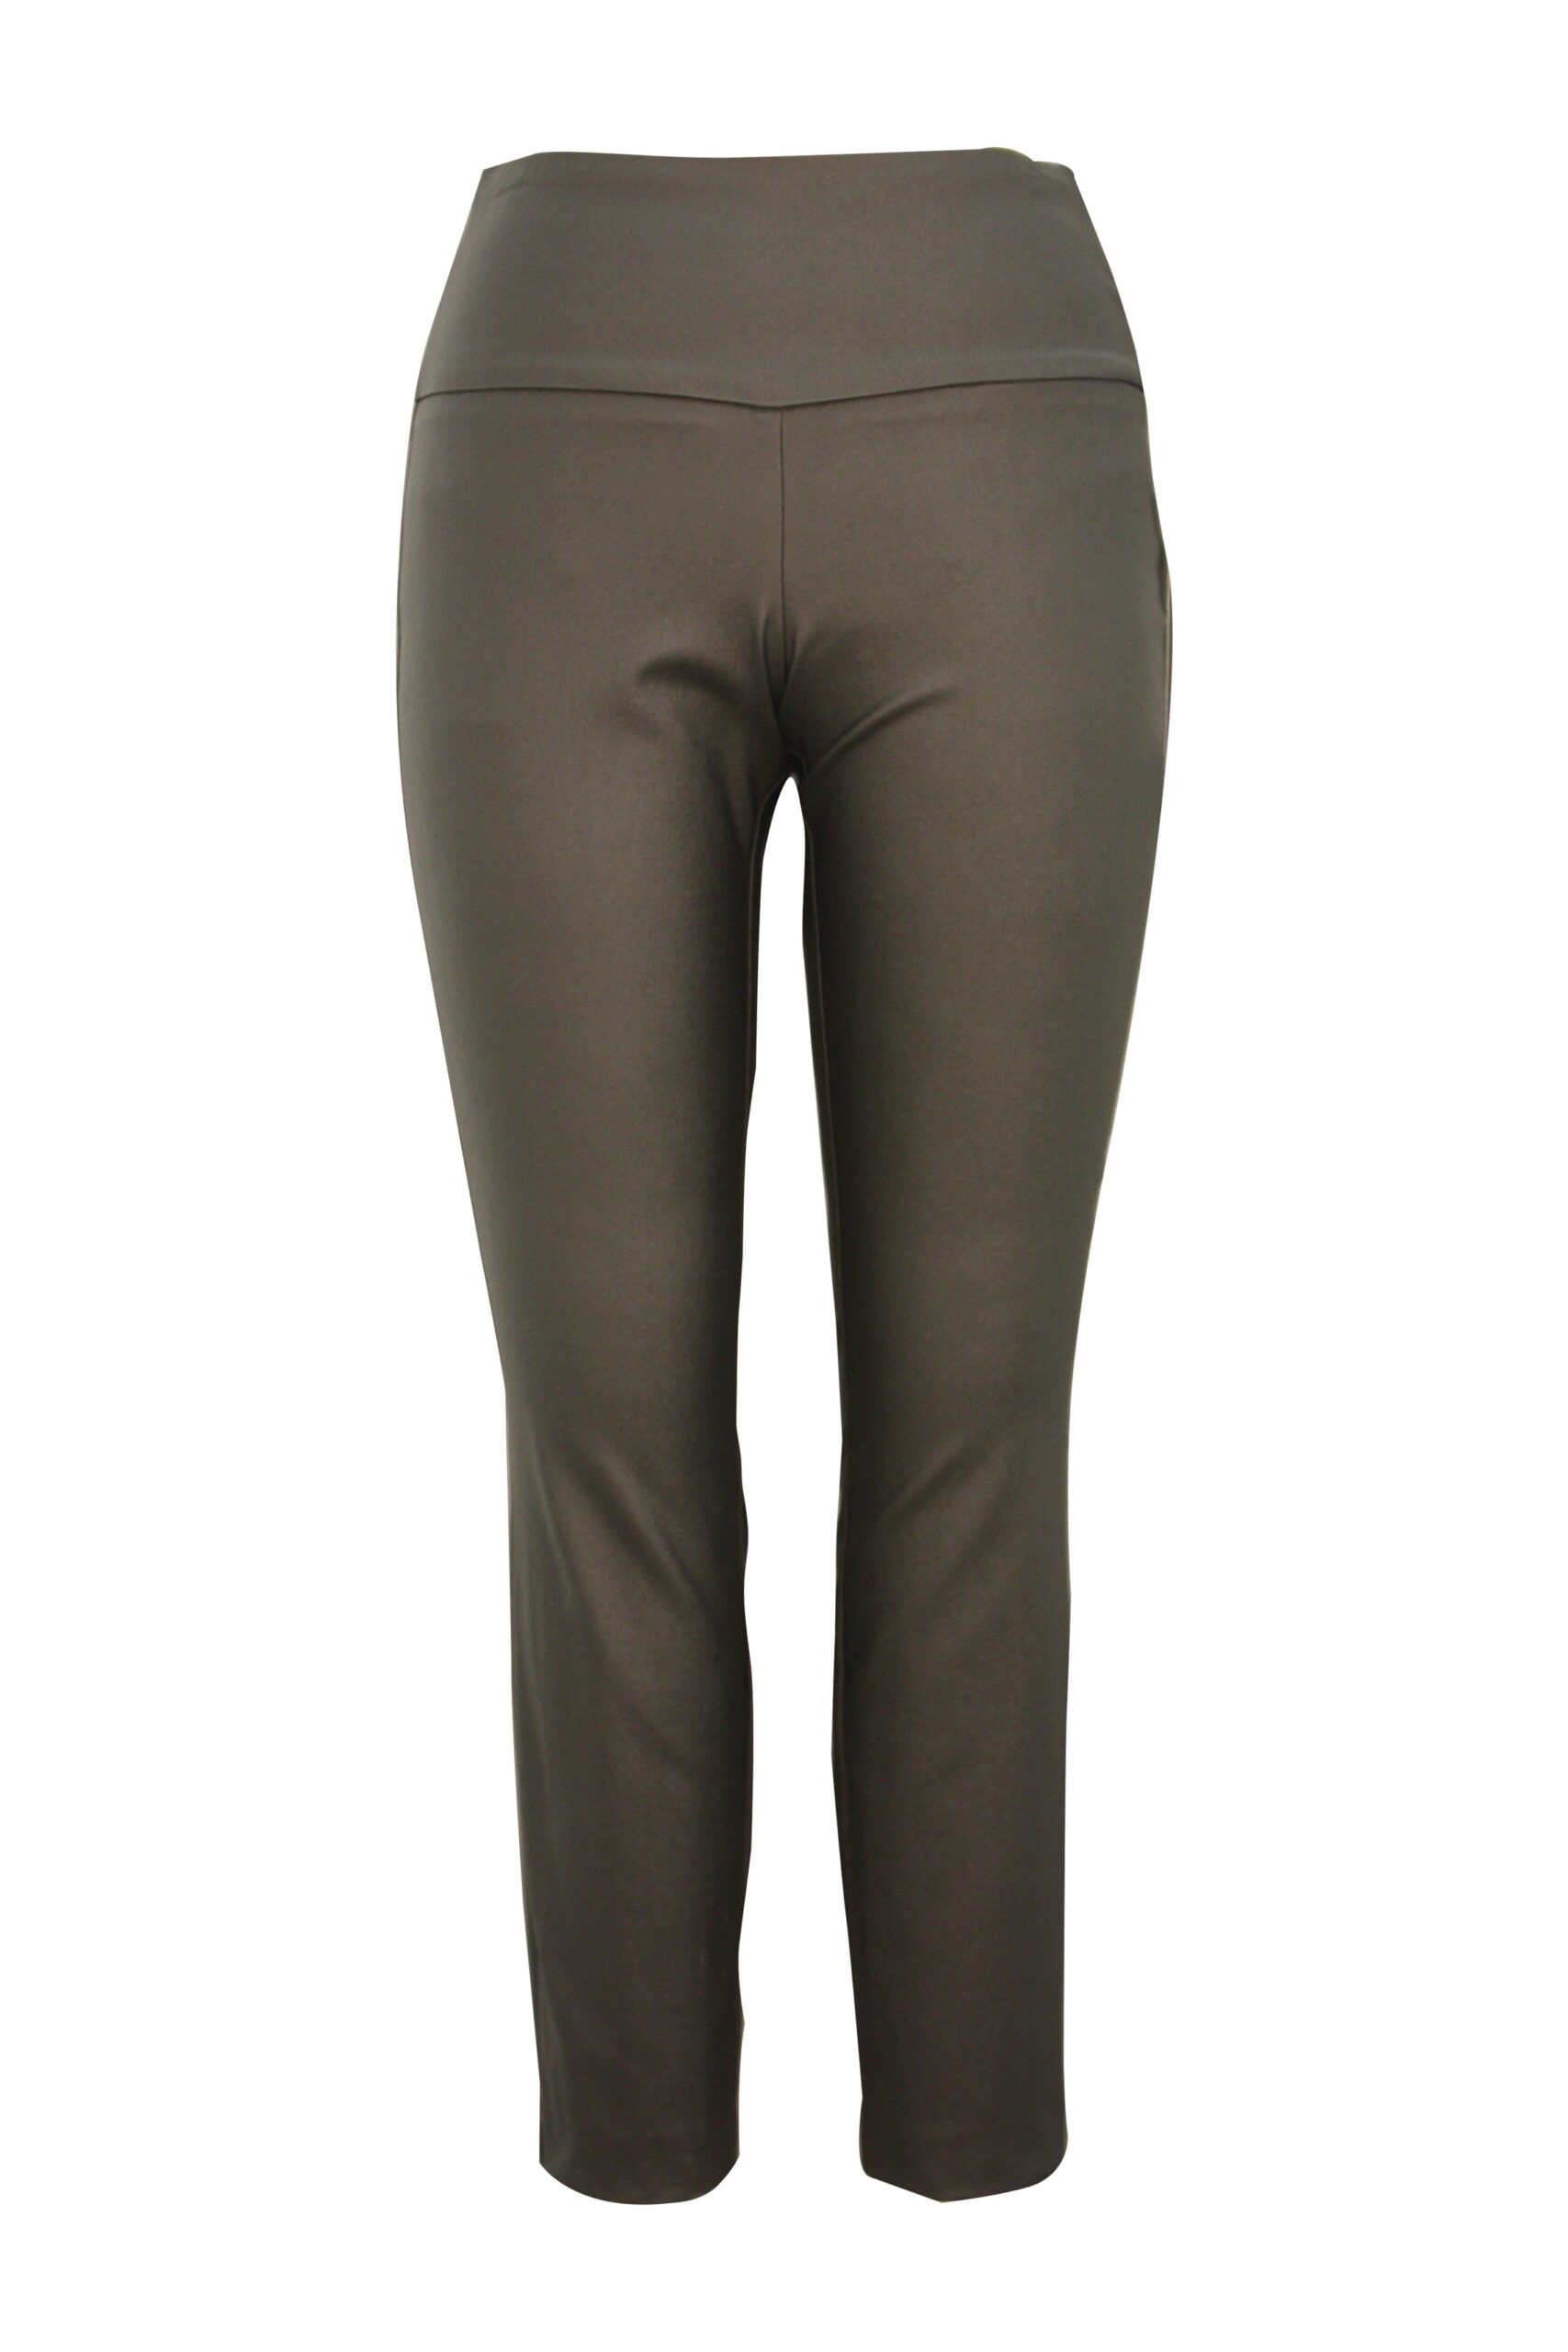 Waxed Leather Look Legging - UP! Pants